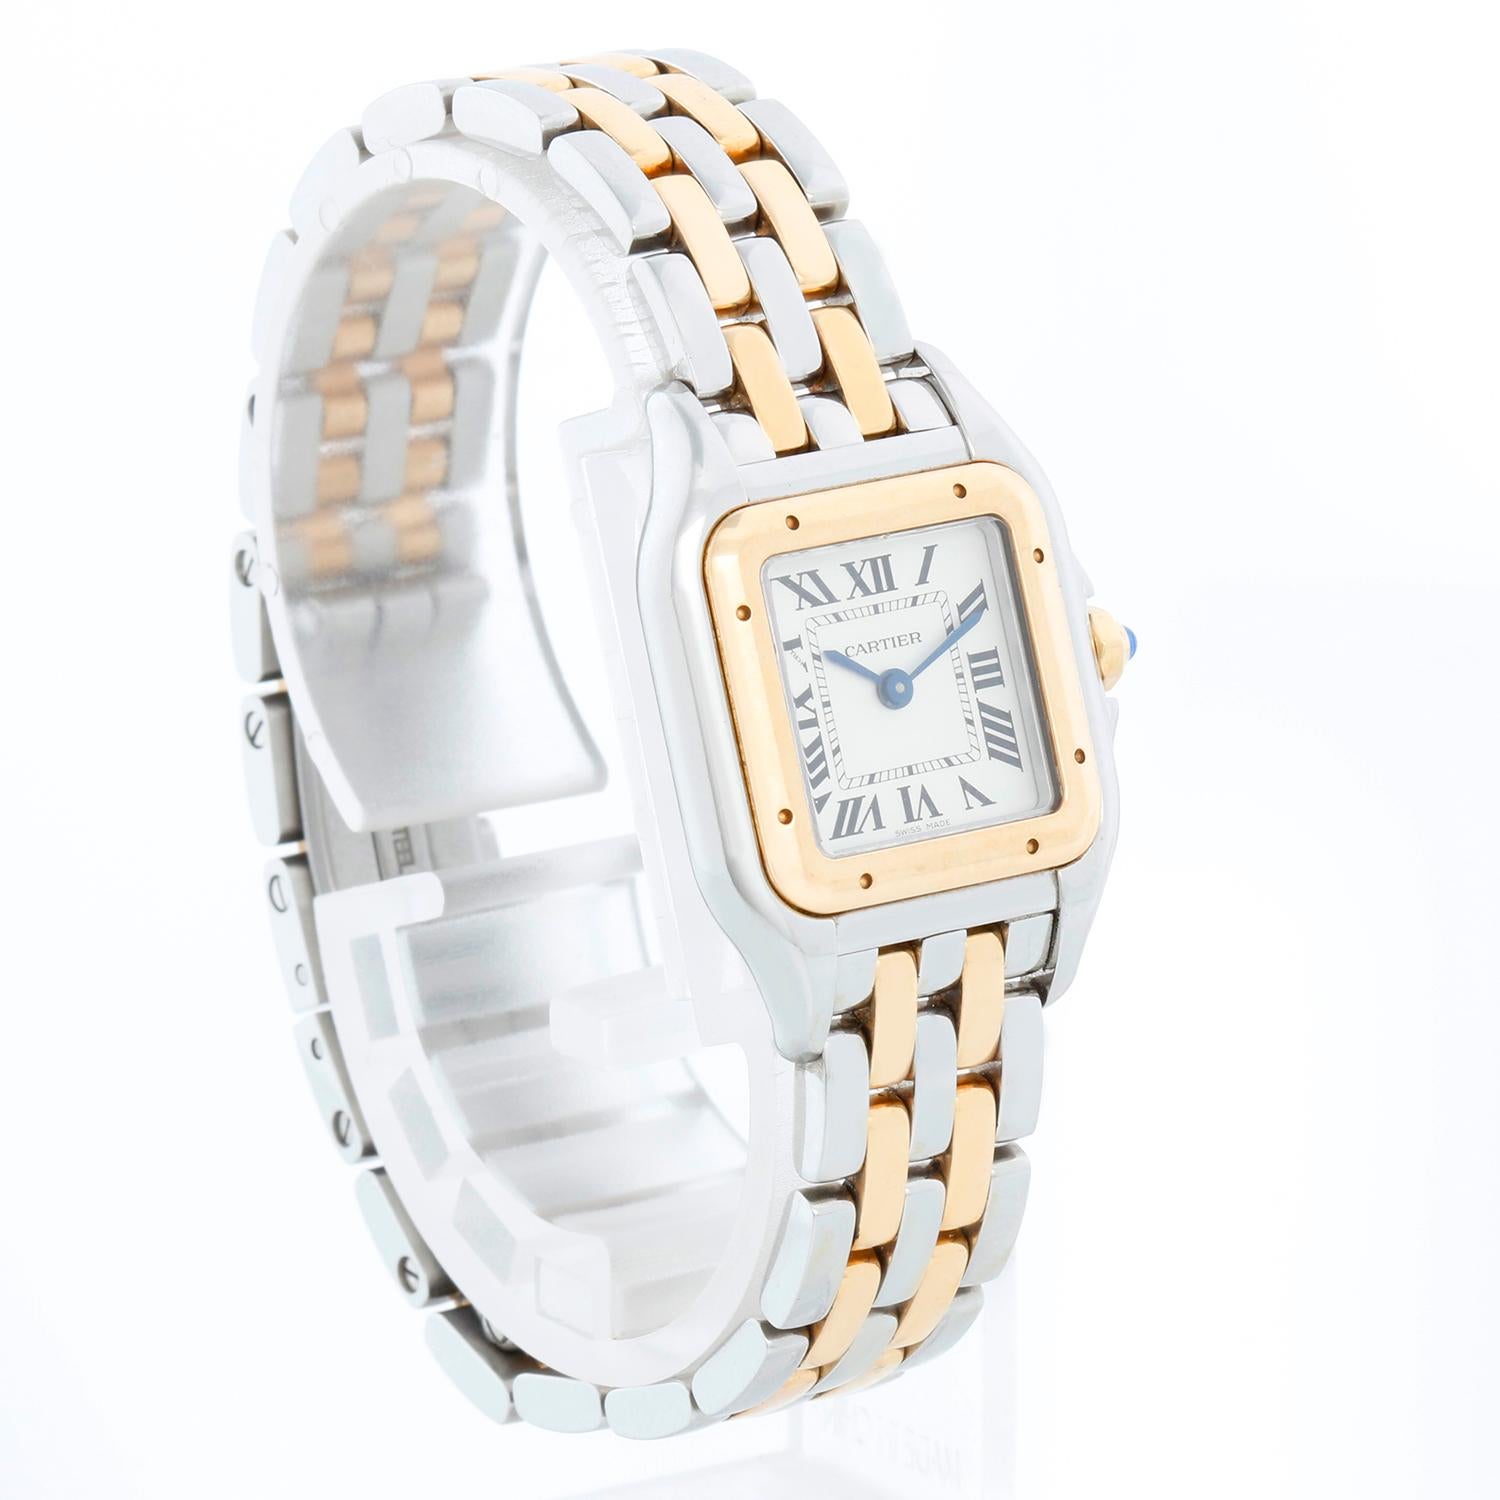 Cartier Panther Small 2-Tone Steel & Gold Panthere Watch 4023 W2PN0006 In Excellent Condition For Sale In Dallas, TX